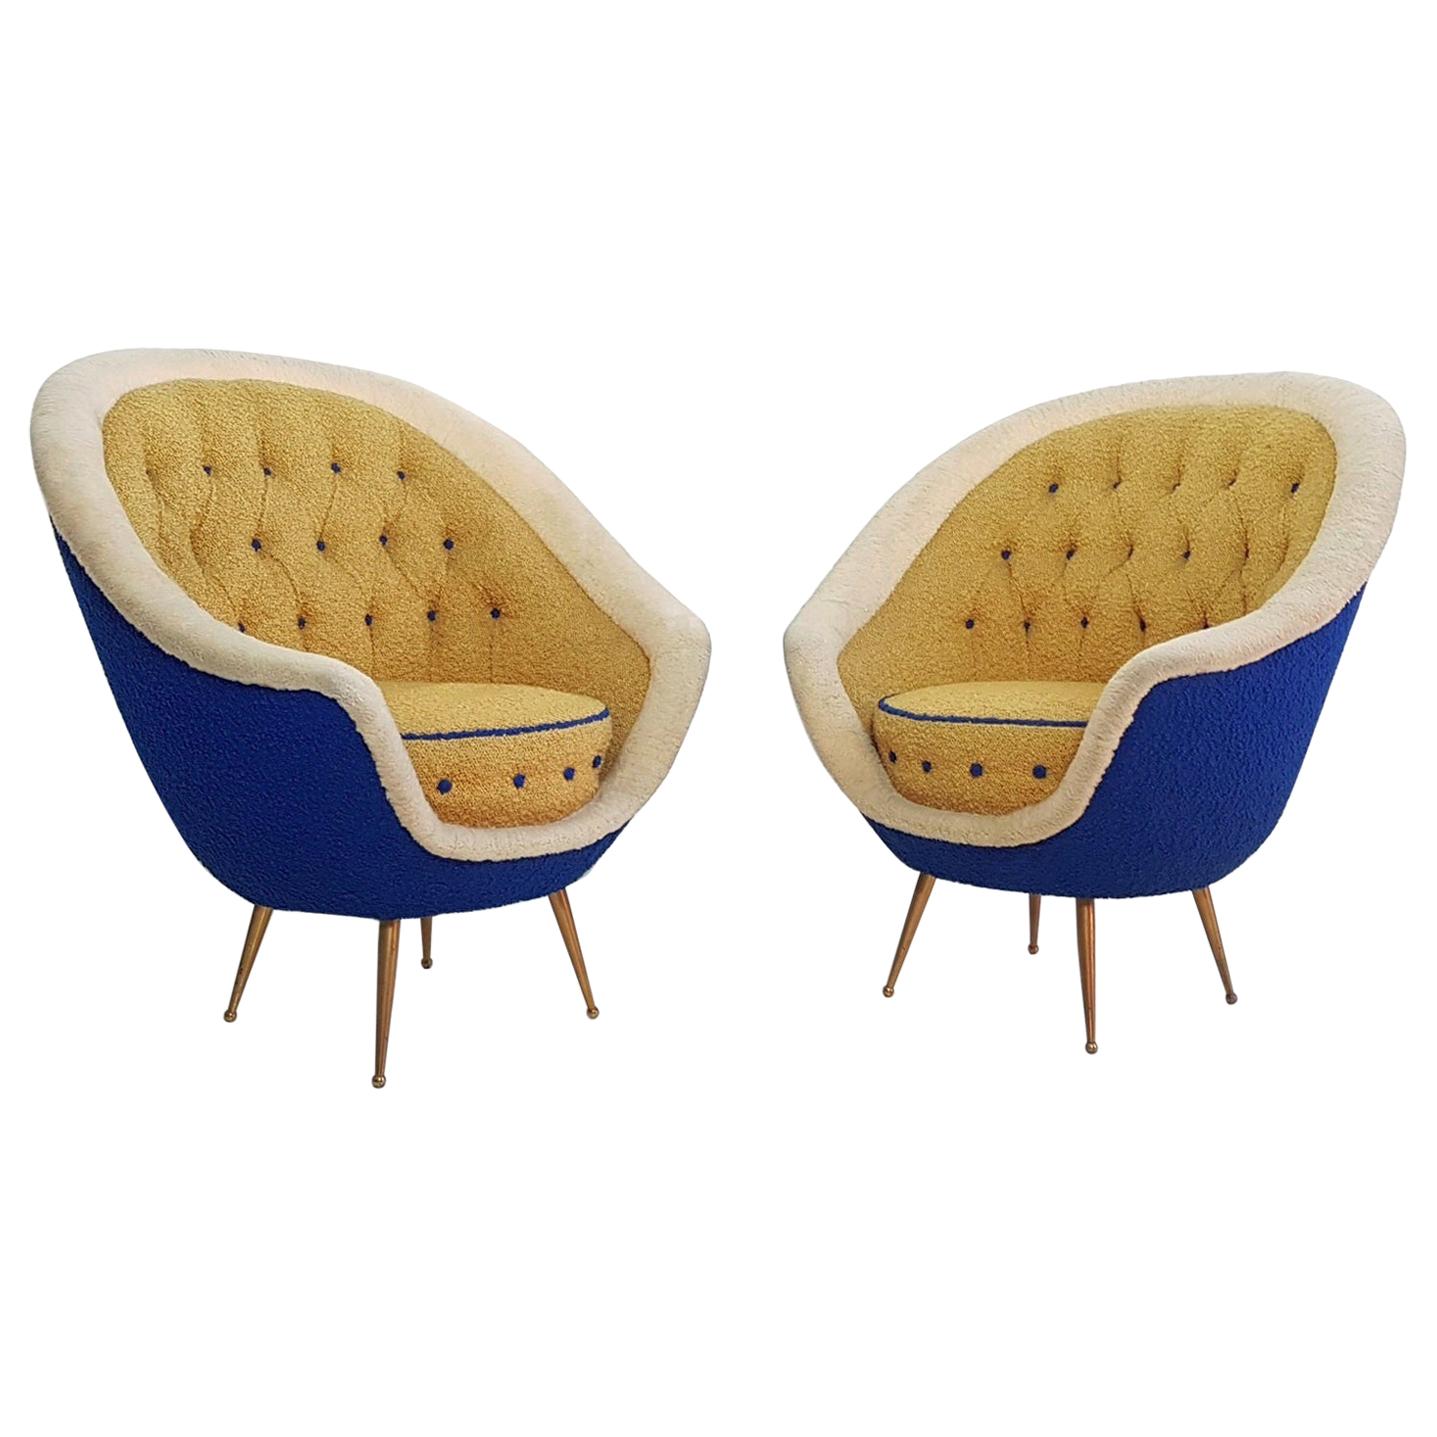 Midcentury Pair of Armchairs with Brass Spider Legs by ISA Bergamo, Italy, 1959